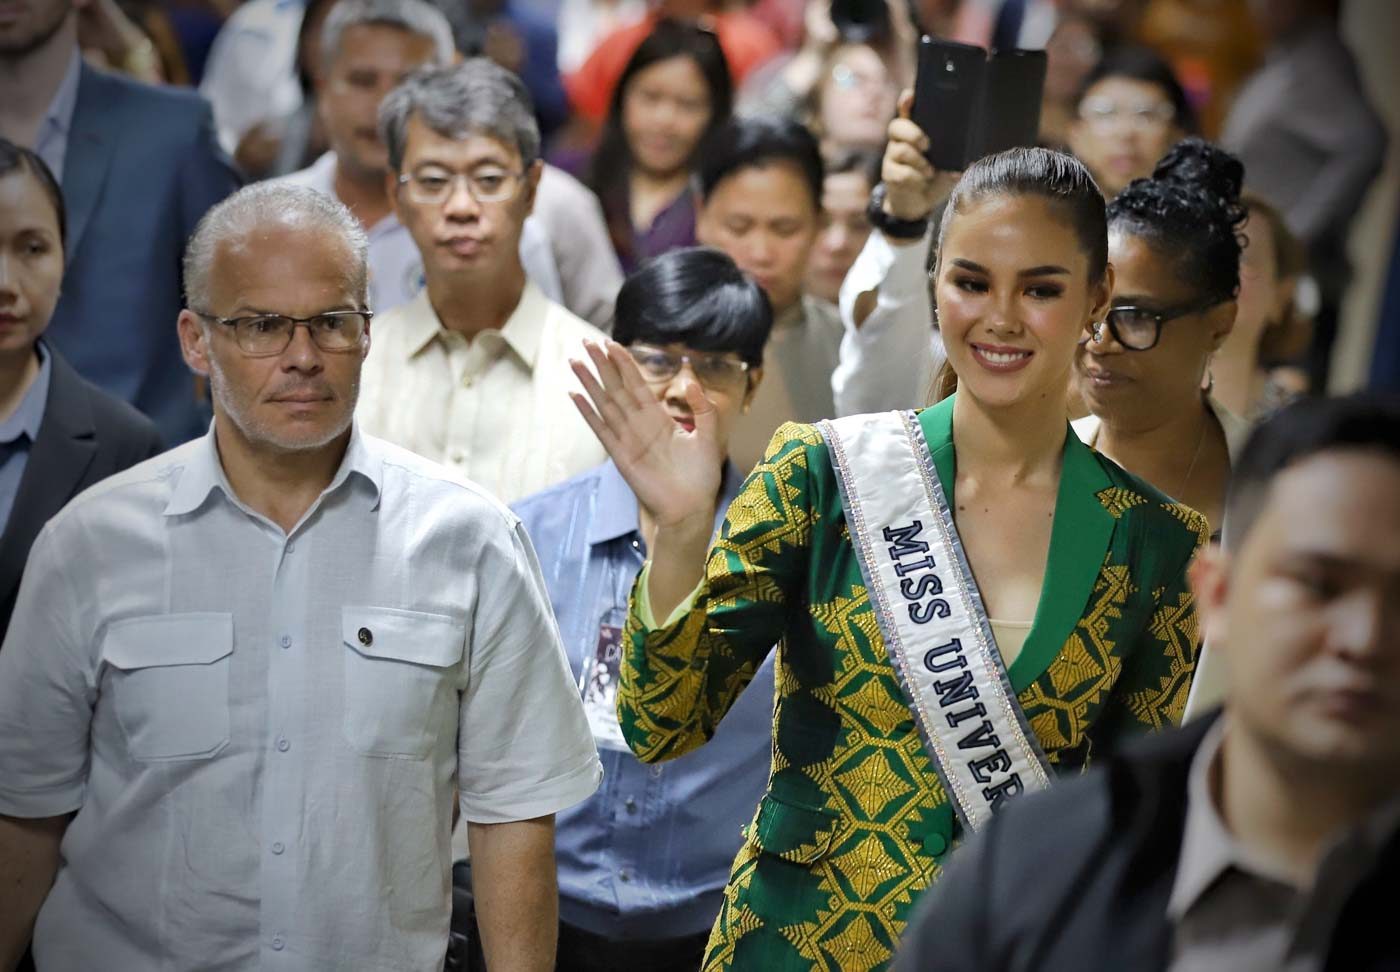 SENATE VISIT. Catriona Gray waves to the Senate employees during her courtesy call. Photo by Joseph Vidal/PRIB 